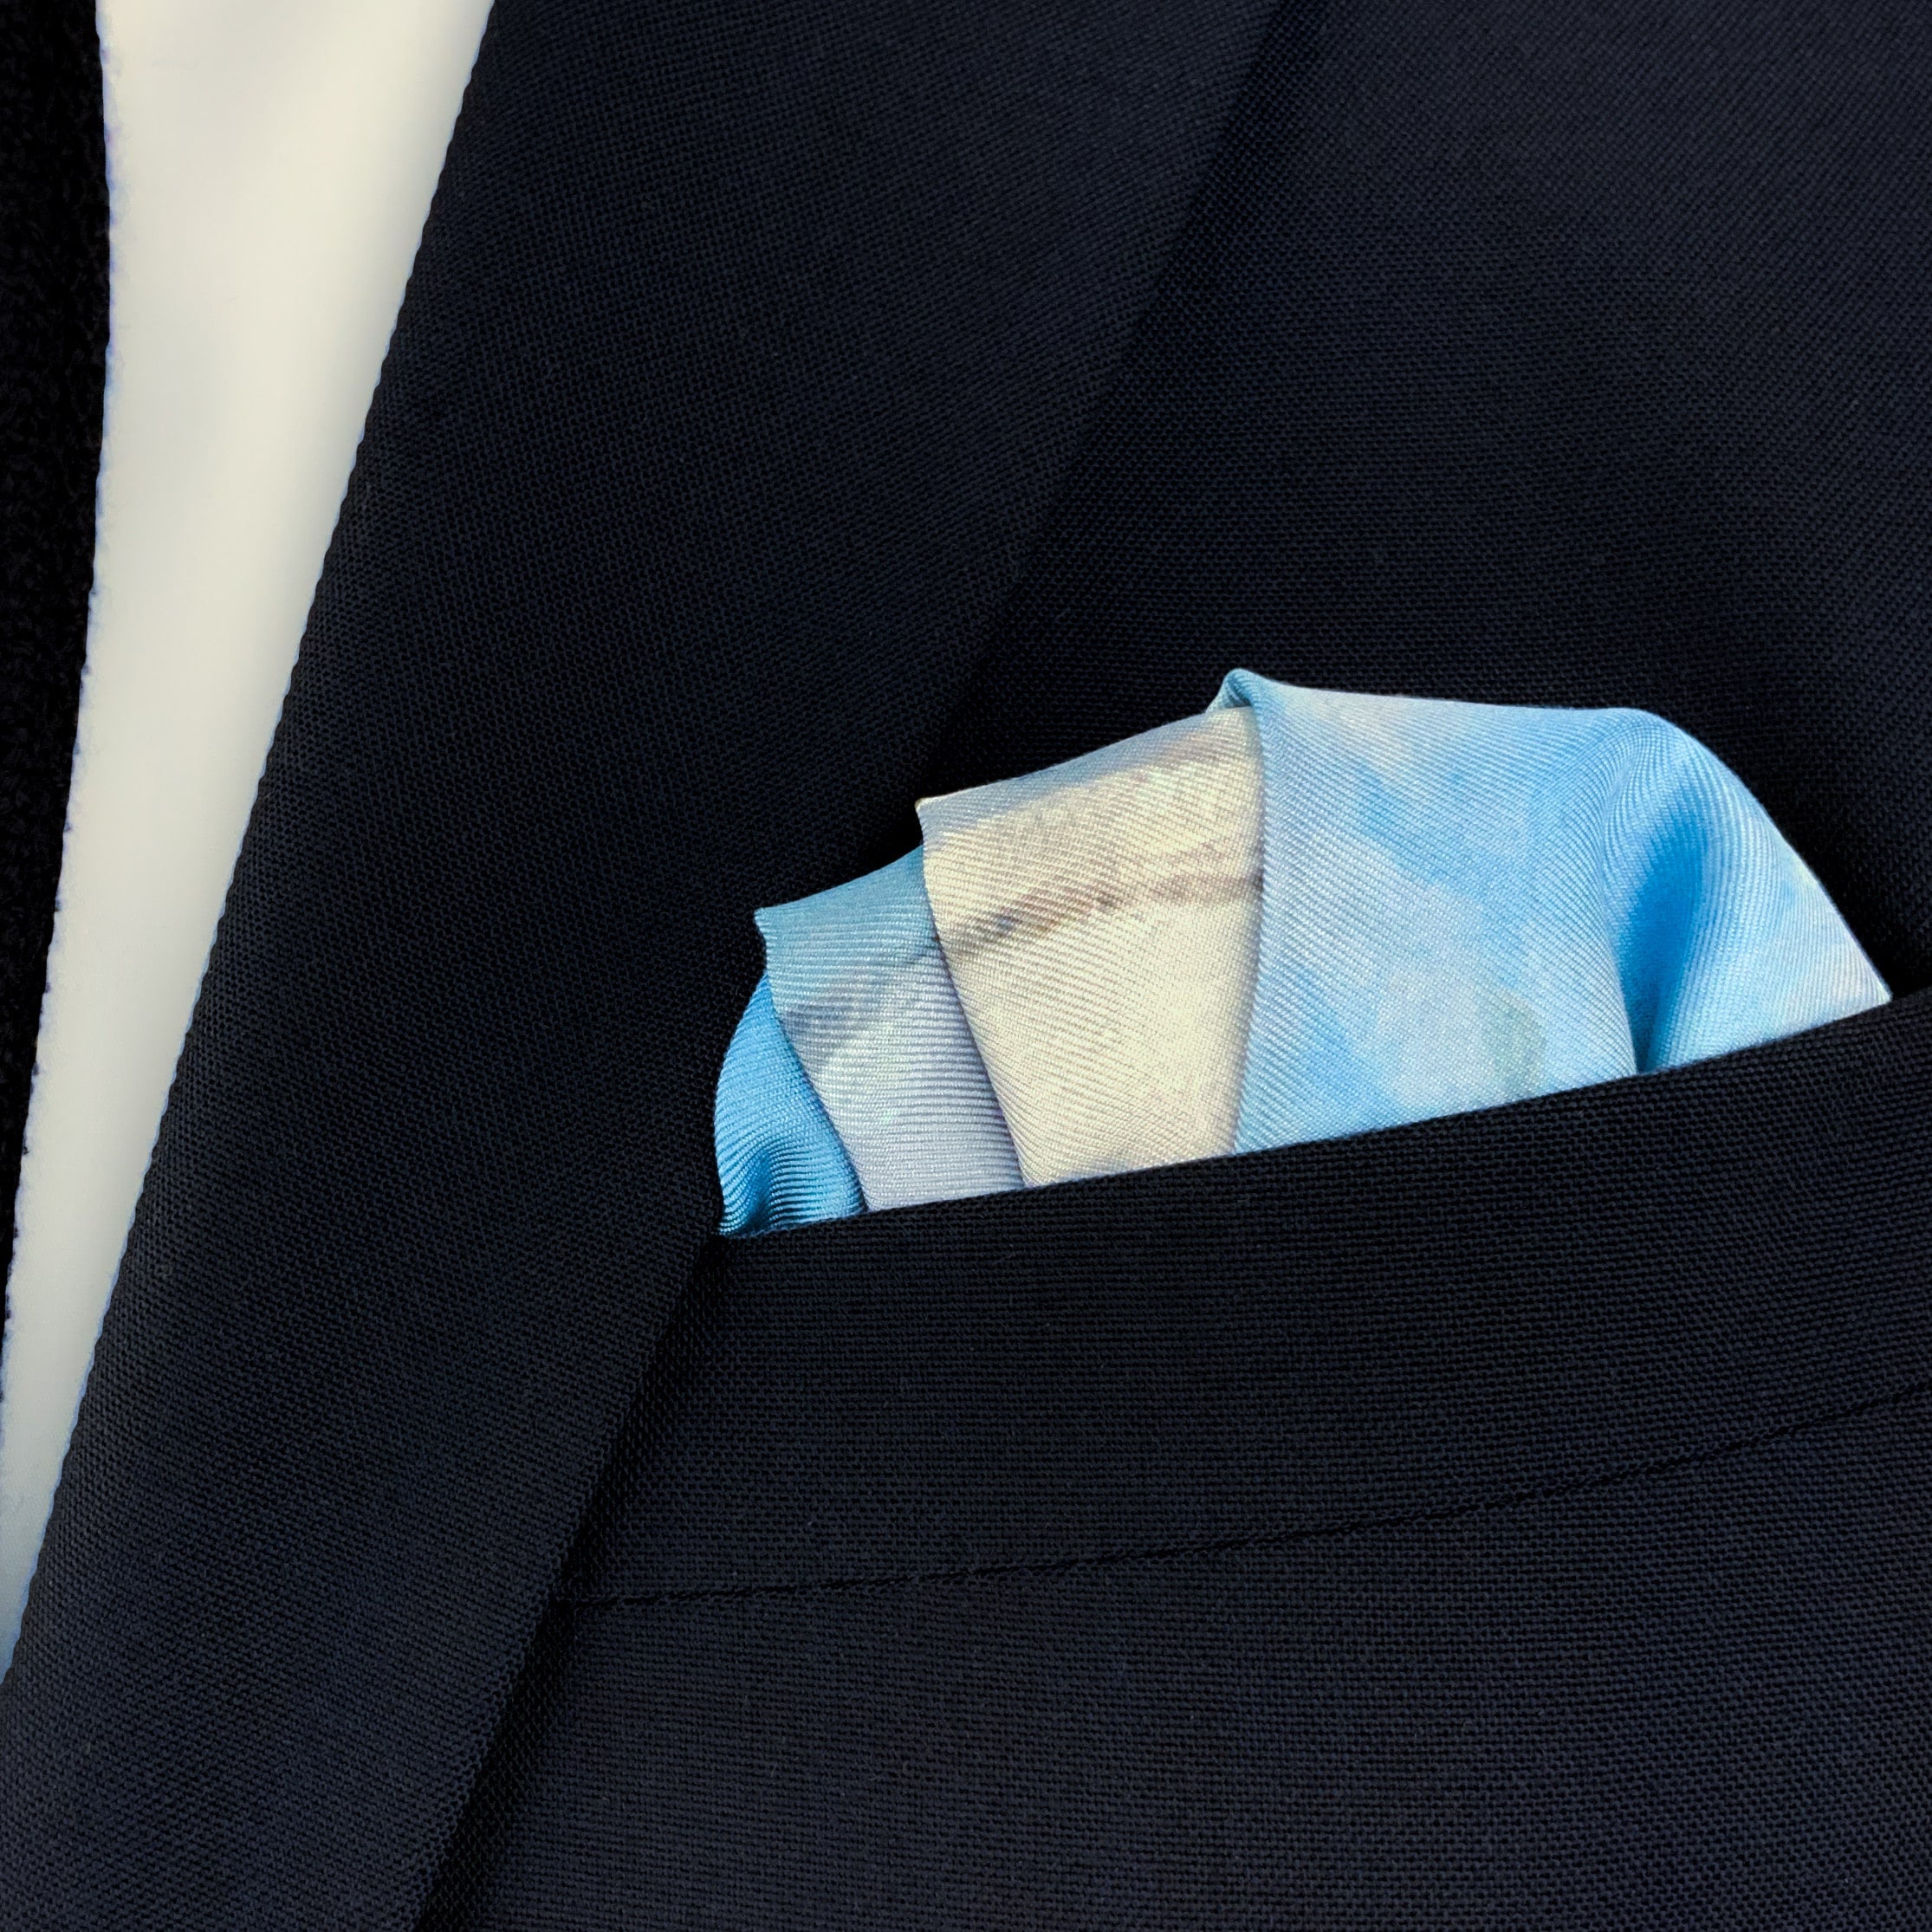 The Magpie historical fine art silk pocket square folded and placed in the breast pocket of a navy blue suit